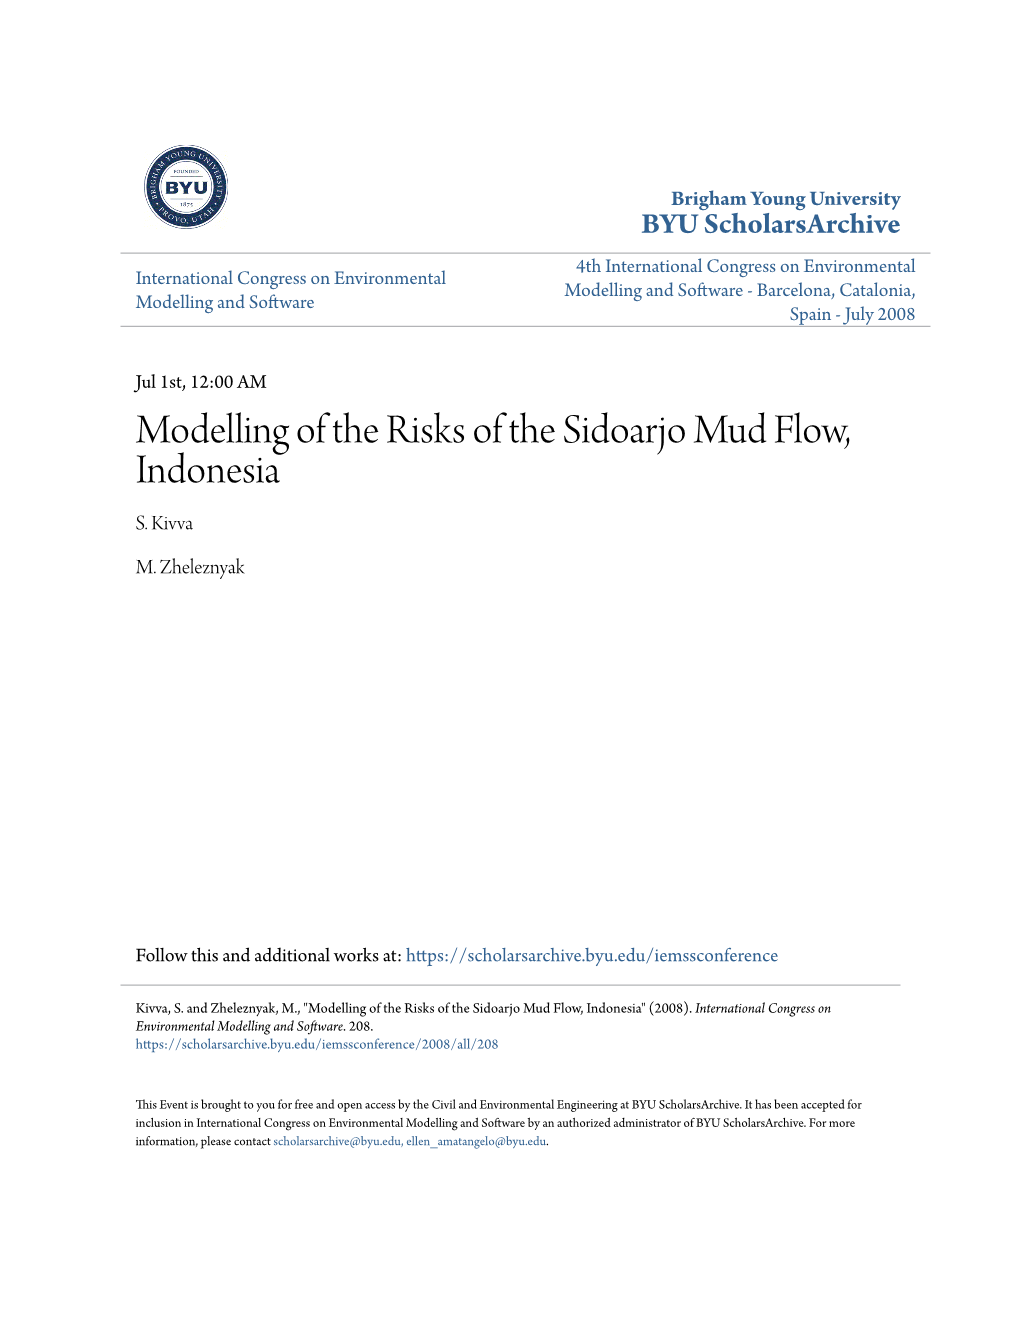 Modelling of the Risks of the Sidoarjo Mud Flow, Indonesia S